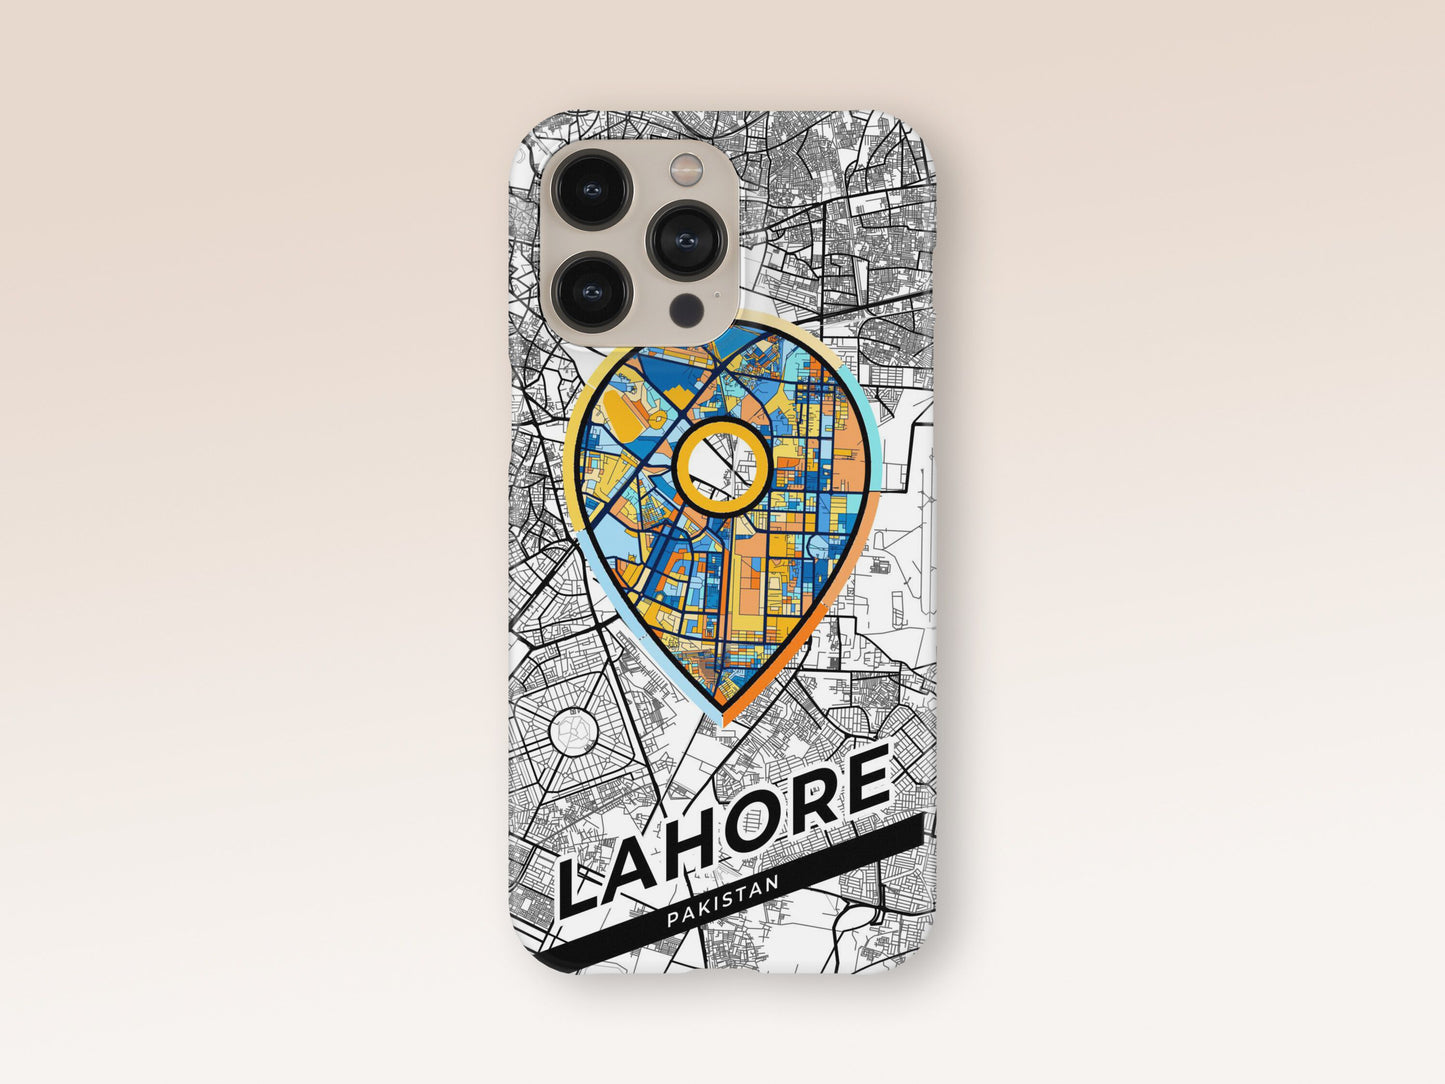 Lahore Pakistan slim phone case with colorful icon. Birthday, wedding or housewarming gift. Couple match cases. 1